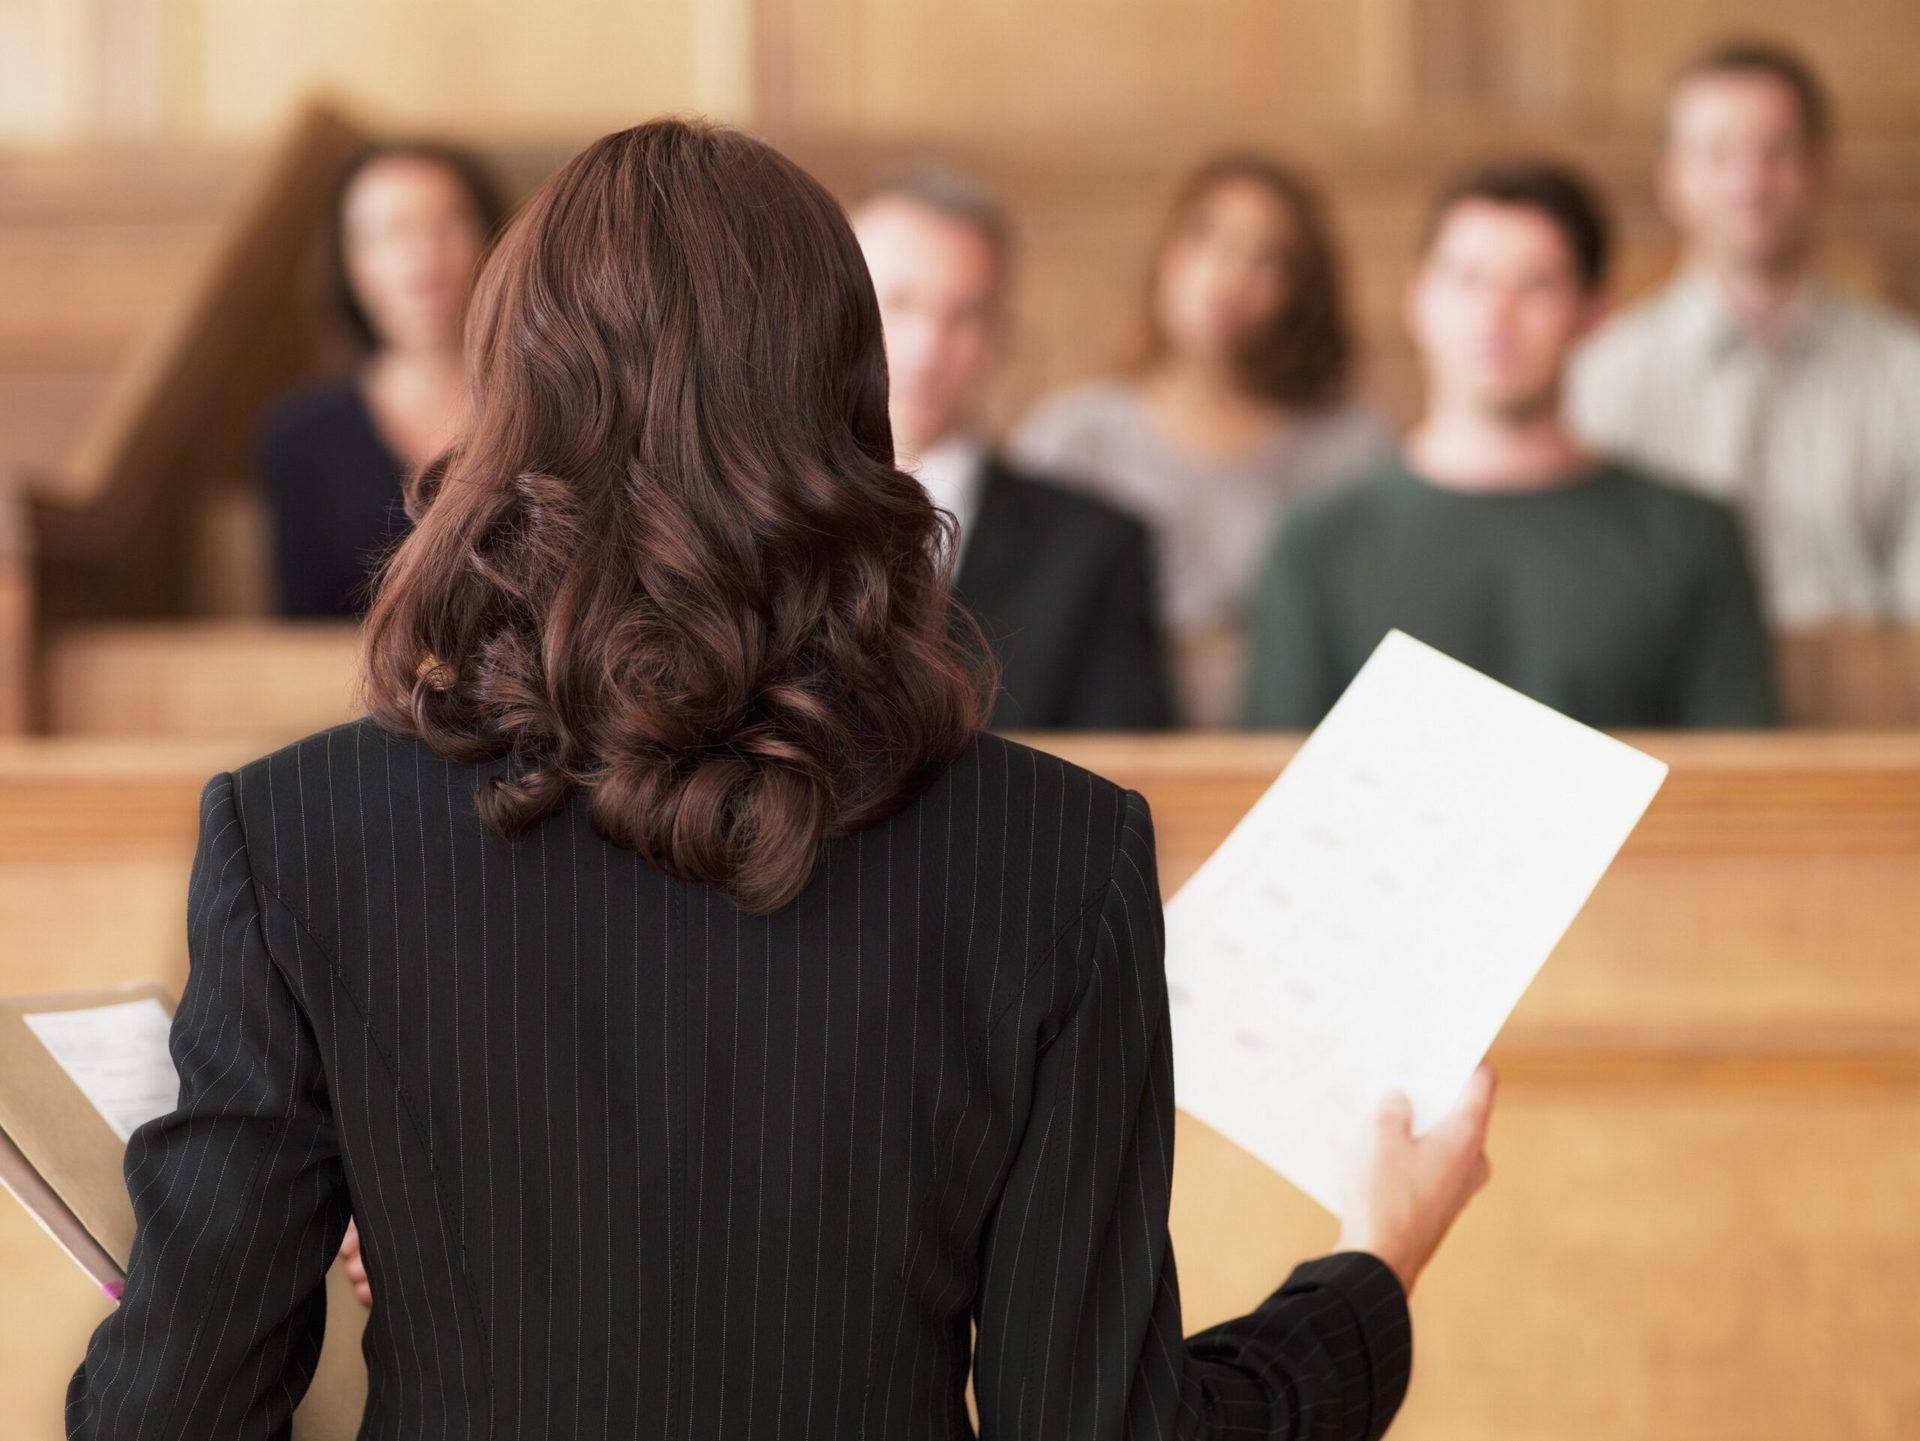 5 Reasons to Hire an Attorney for Your Cannabis Business